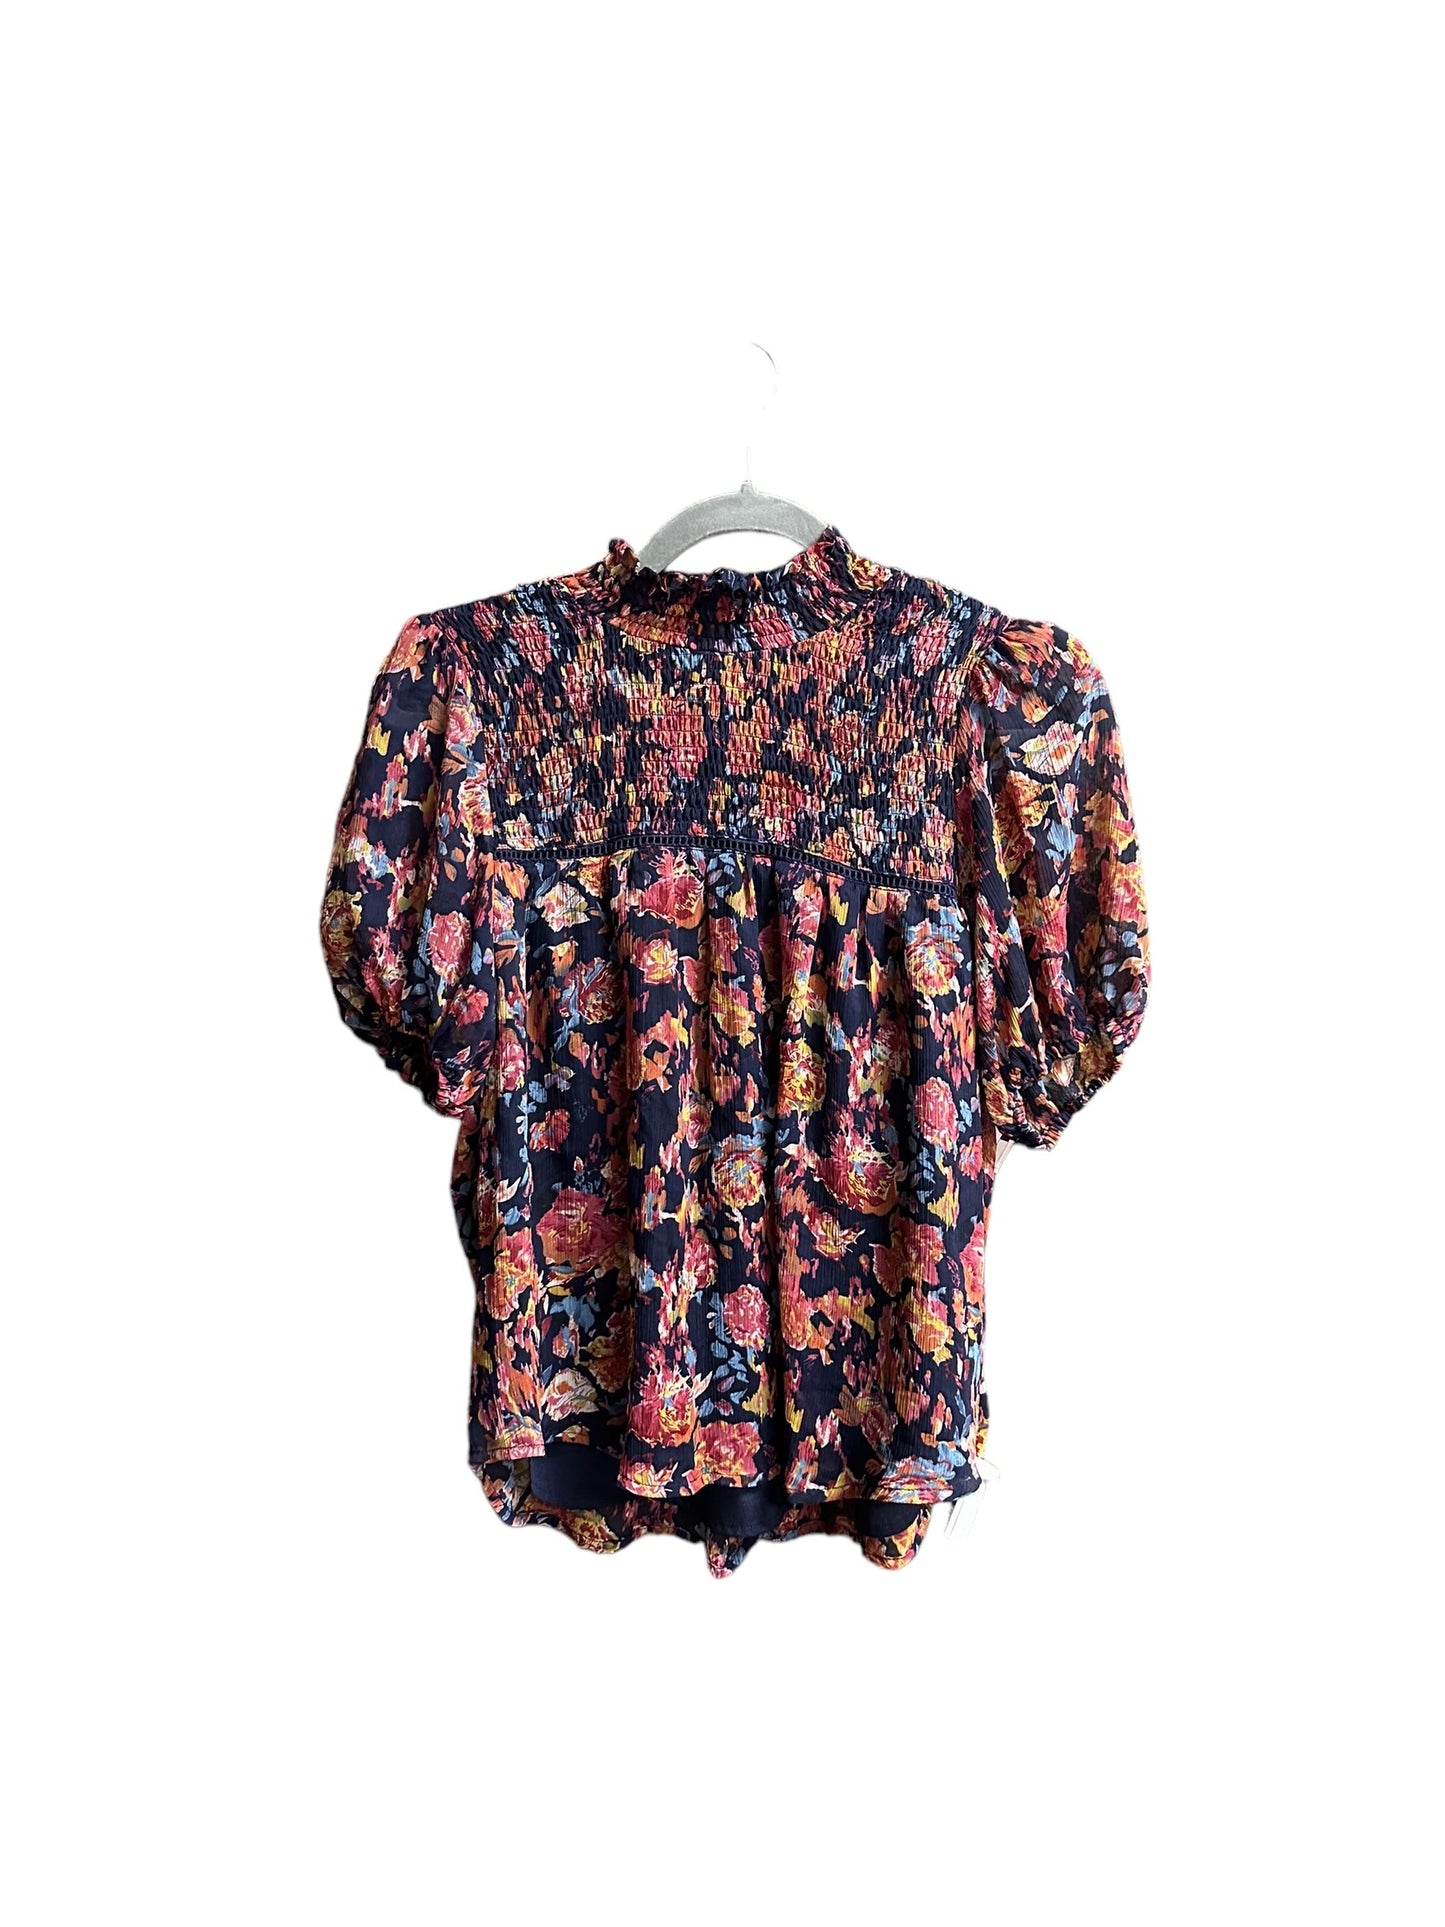 Floral Print Top Short Sleeve Thml, Size S